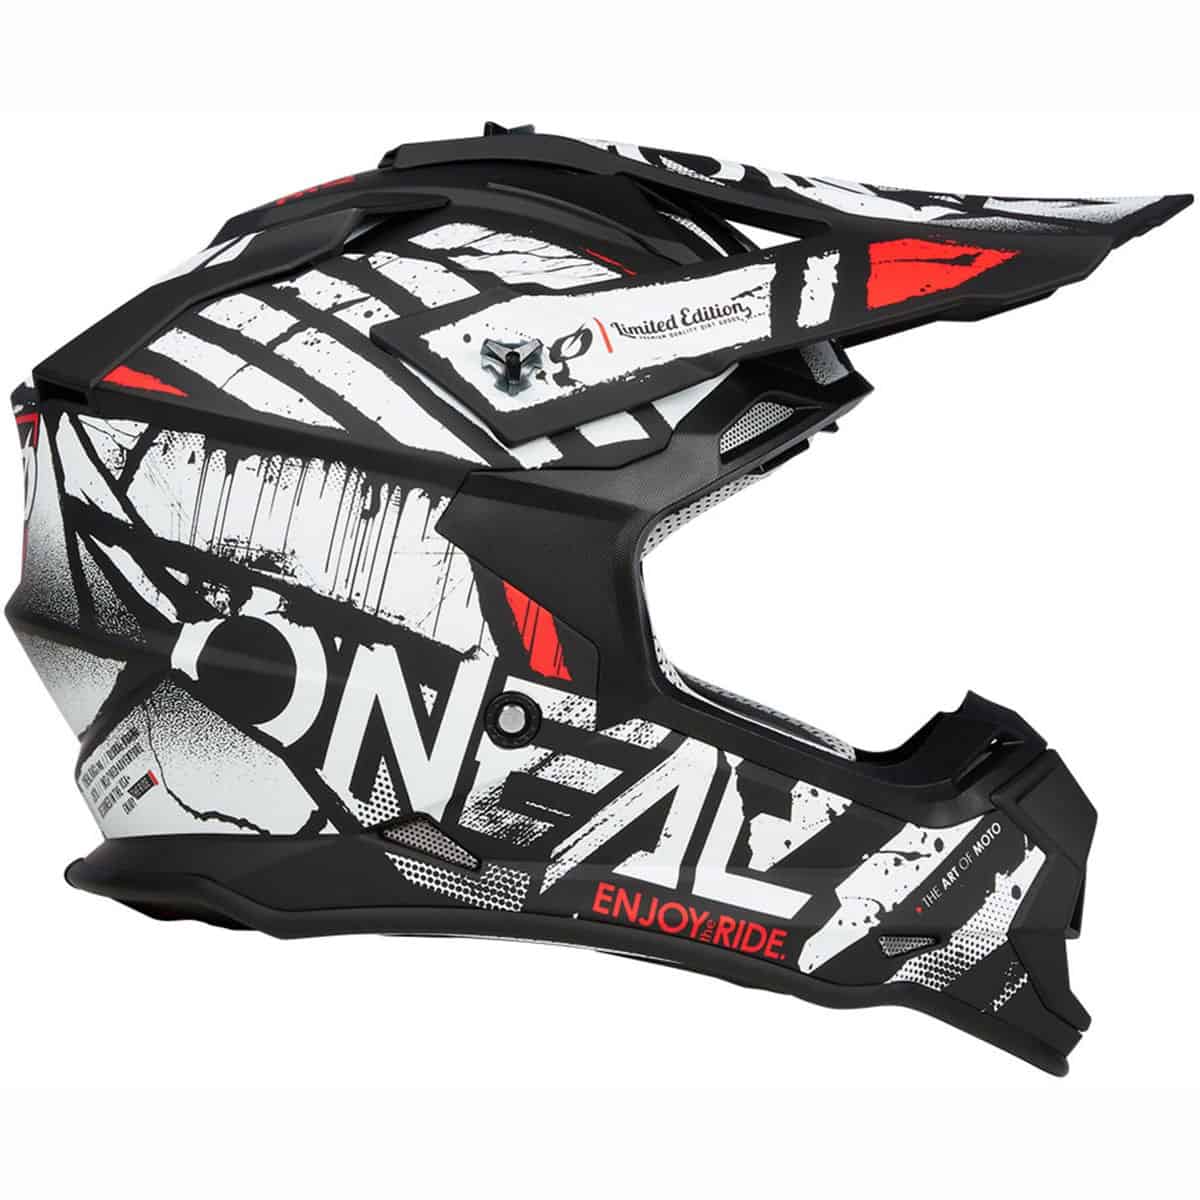 ONeal 2SRS Helmet in the Glitch Graphic: Motocross Enduro Helmet with excellent vent